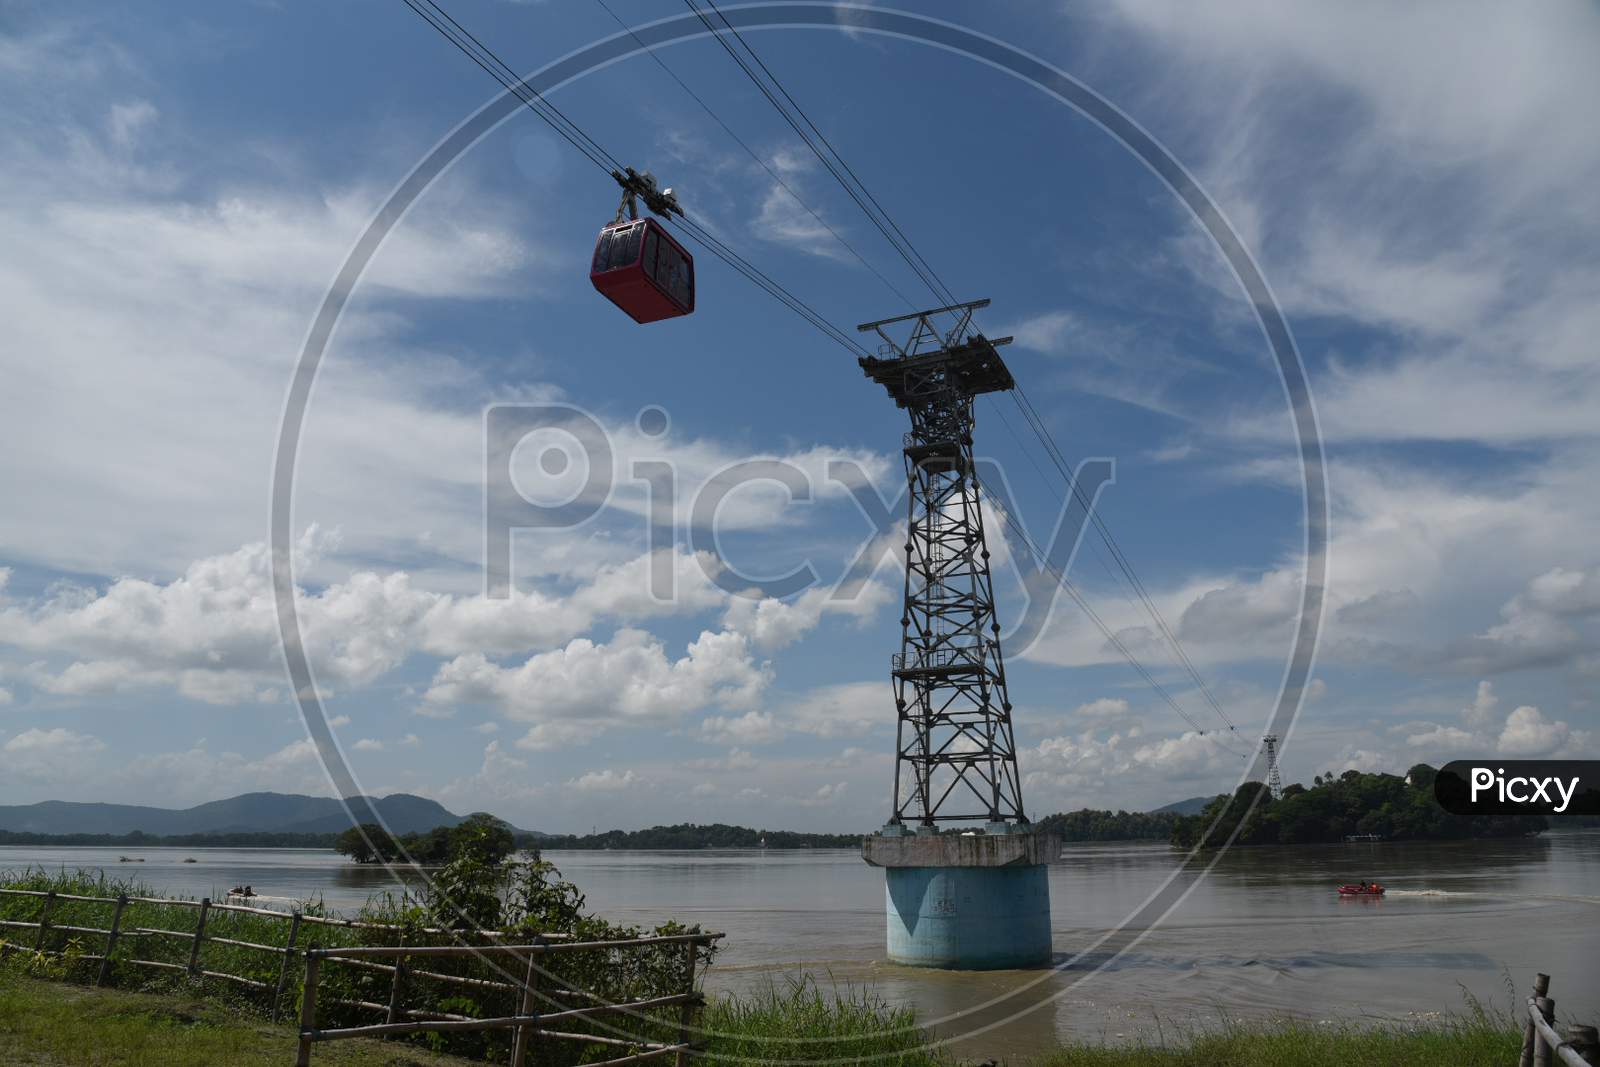 People Travel In Cable Car Cabins In India's Longest River Ropeway Over The River Brahmaputra, In Guwahati On August 24, 2020.